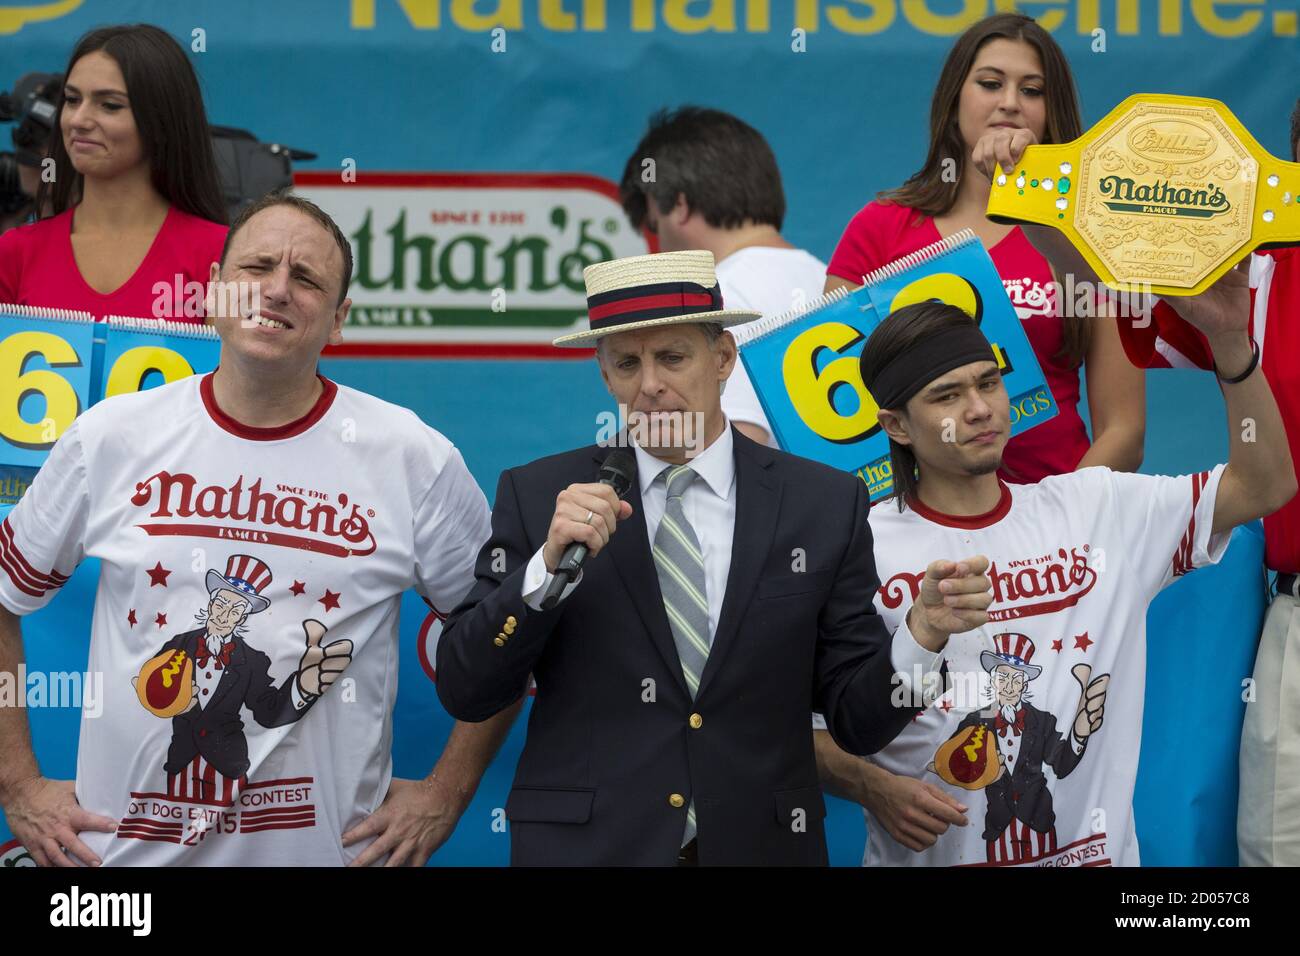 Matt Stonie (R) crowned winner of the annual Fourth July 2015 Nathan's Famous Hot Dog Eating Contest in Brooklyn, New York July 4, 2015. Stonie defeated 8 time champion Joey